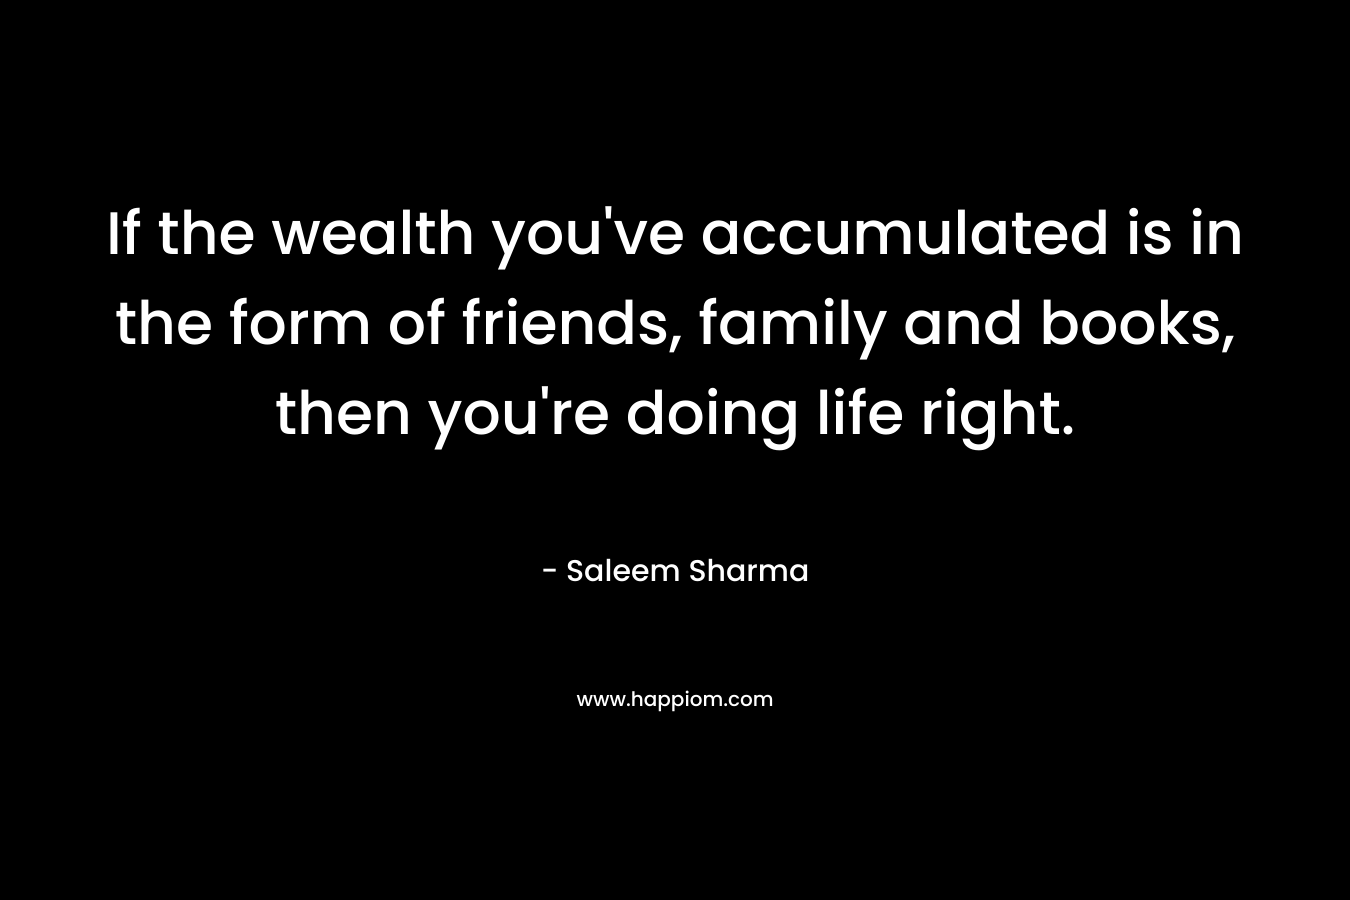 If the wealth you’ve accumulated is in the form of friends, family and books, then you’re doing life right. – Saleem Sharma